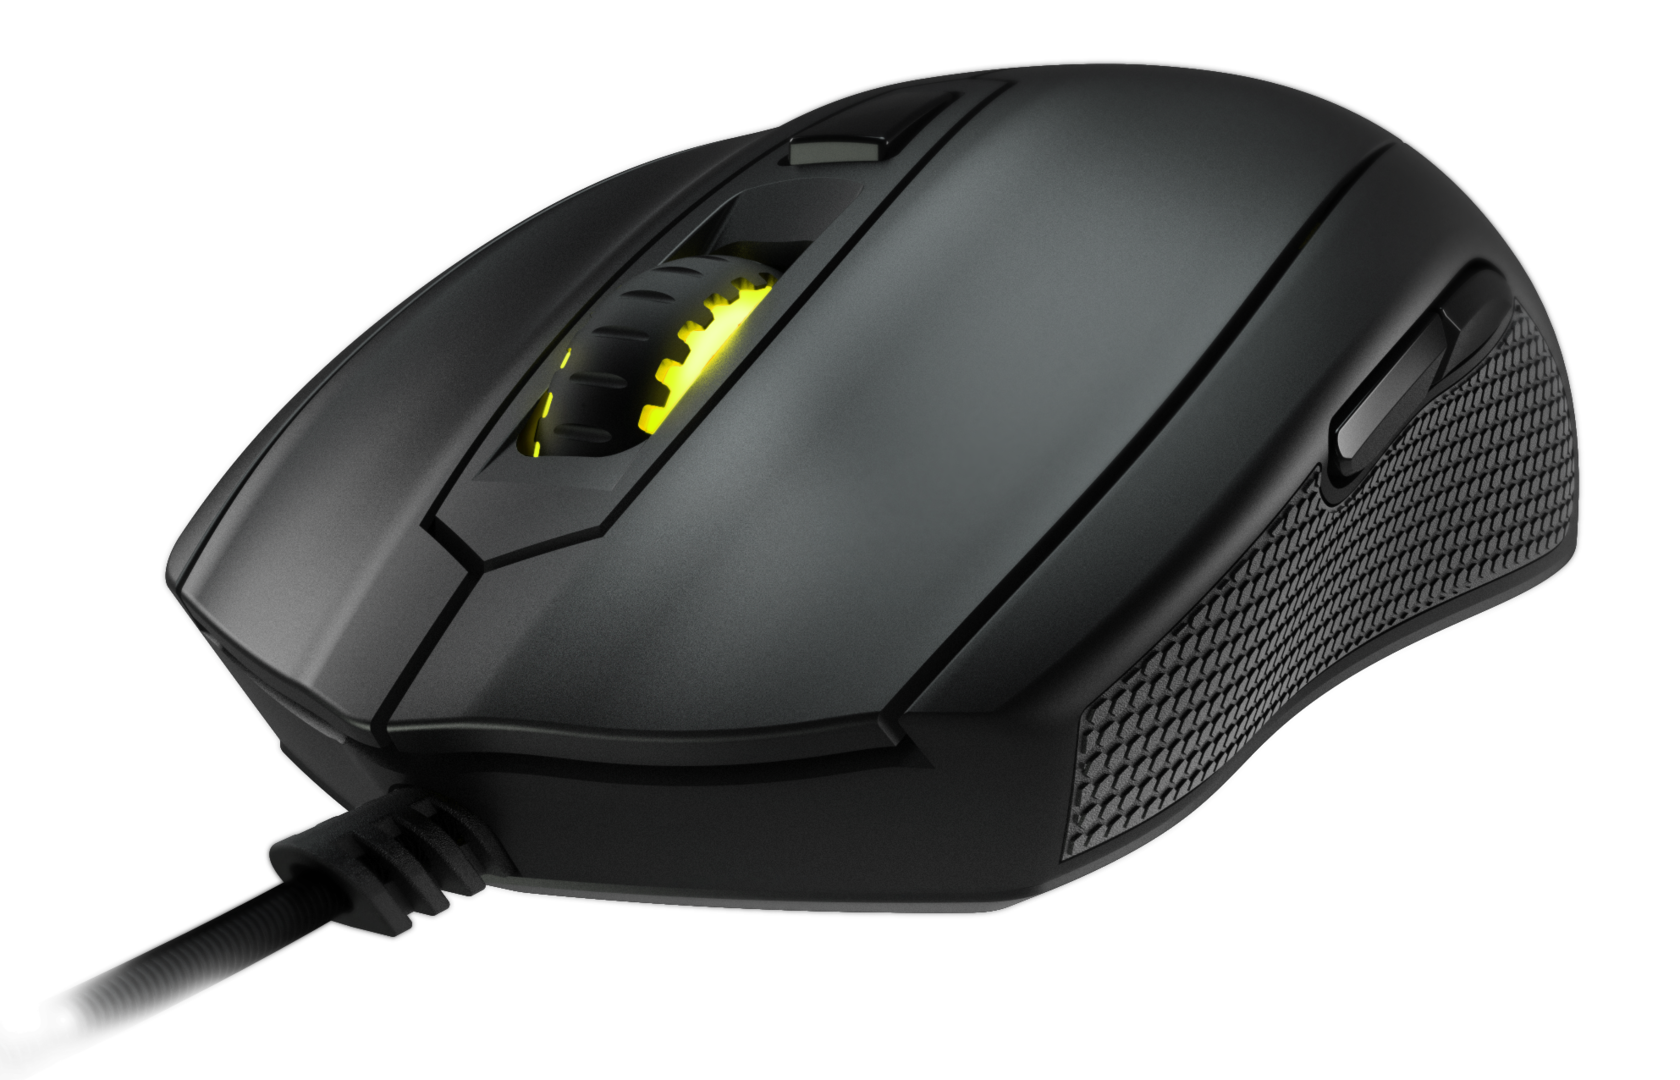 Mionix Castor Optical Gaming Mouse (PC), Mionix